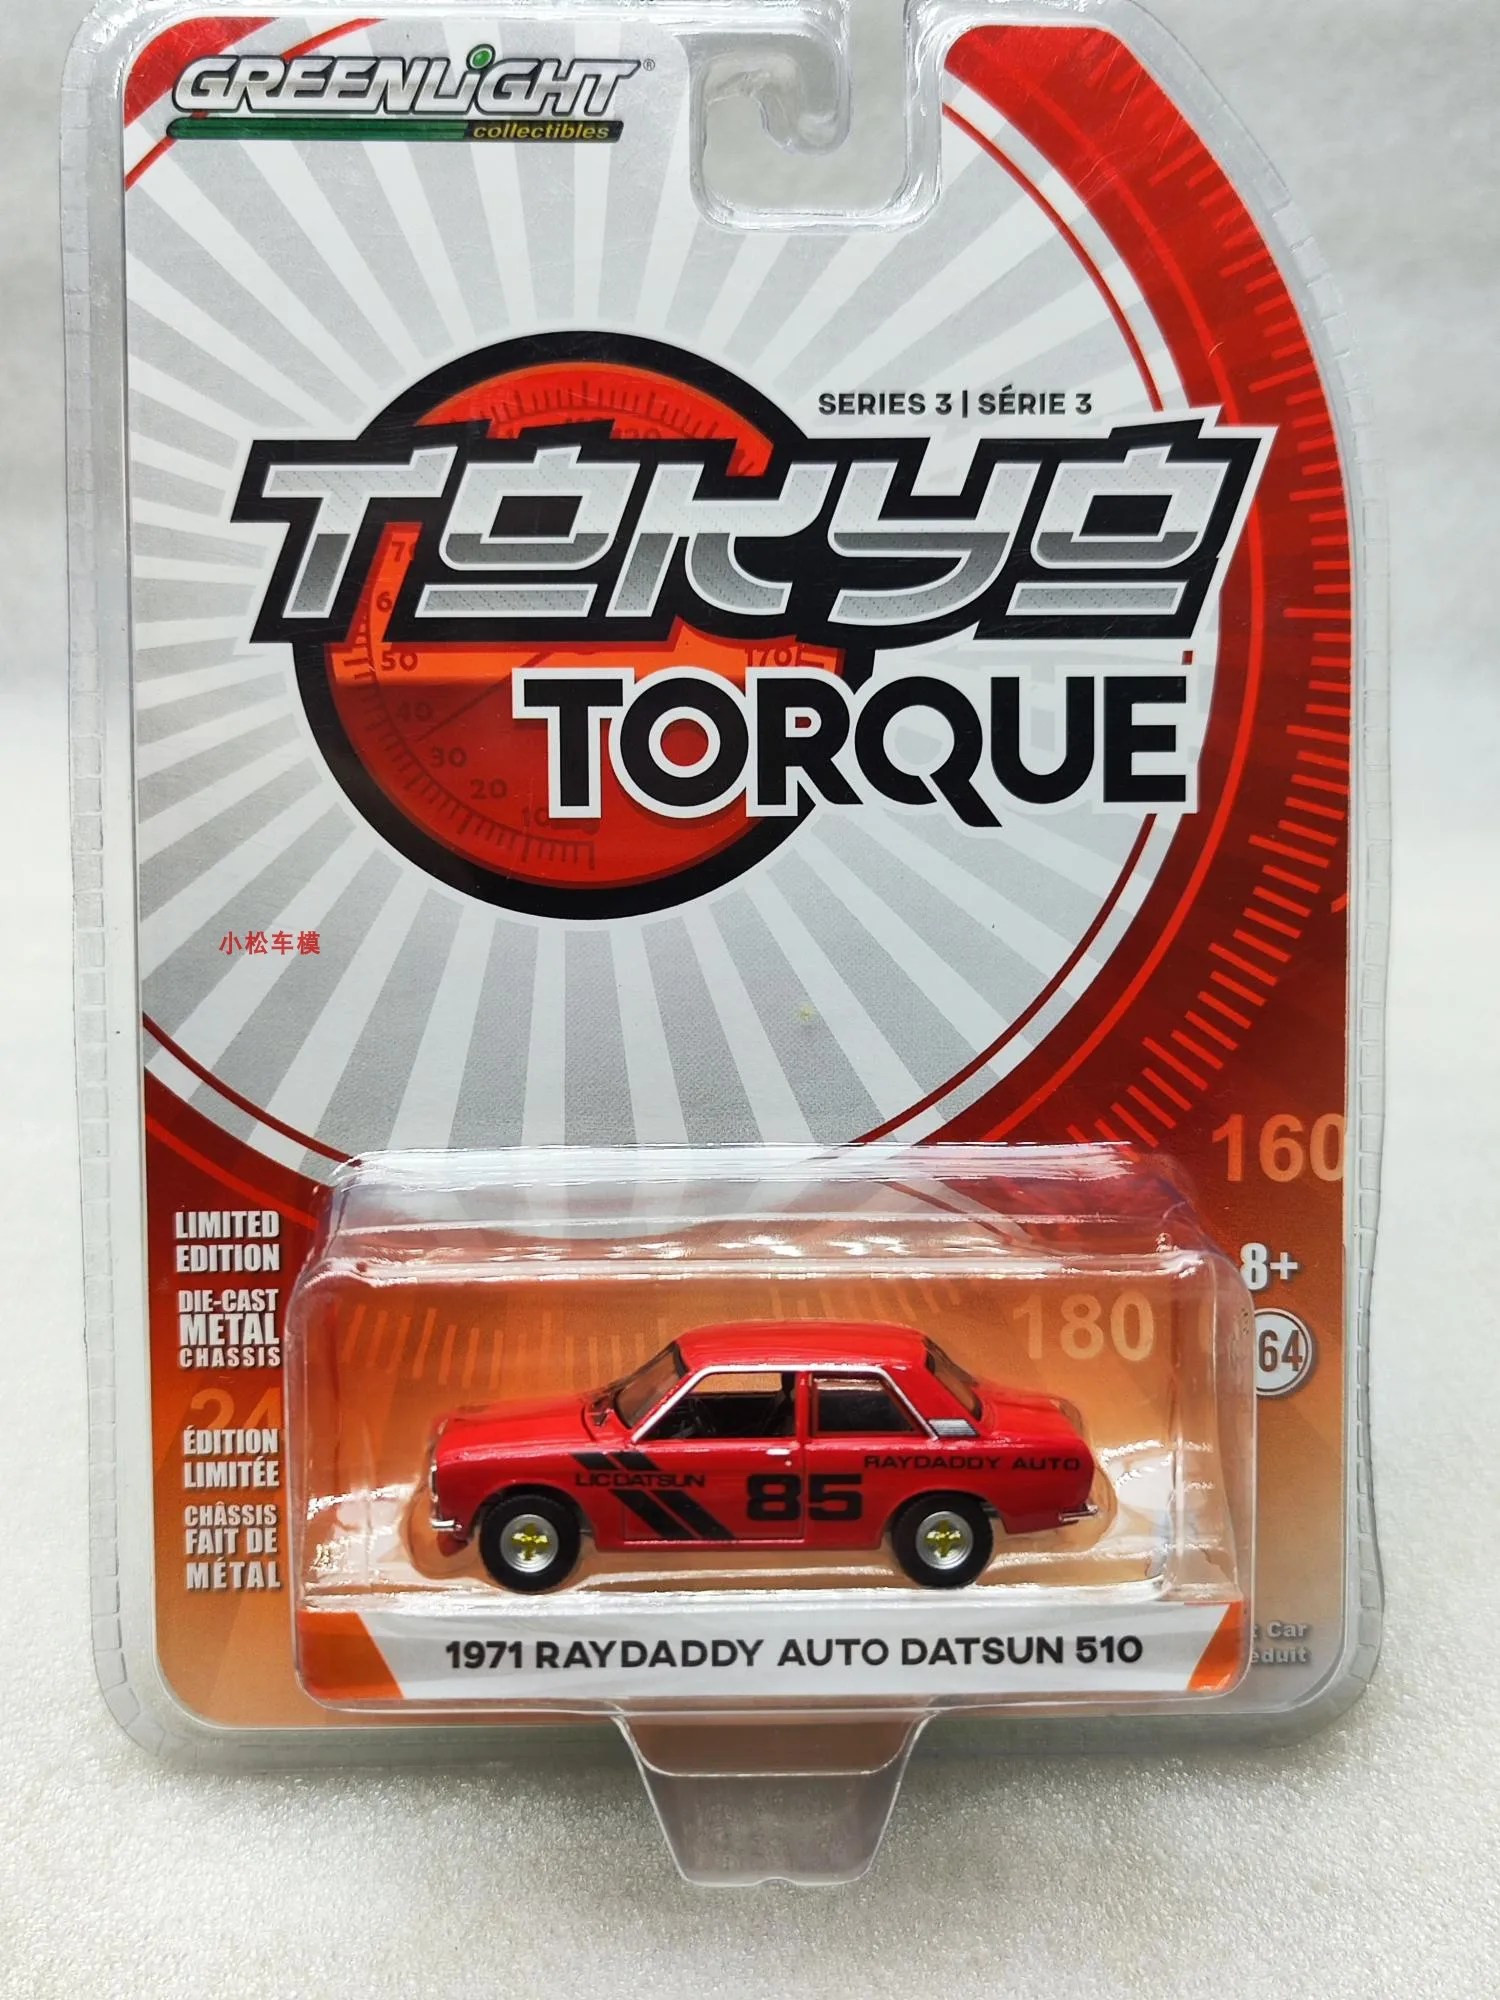 

GreenLight 1/64 Scale Diecast Car Model Toys 1971 Raydaddy Auto Datsun 510 NO.85 Die-Cast Metal Vehicle Toy For Boys Kids Gift